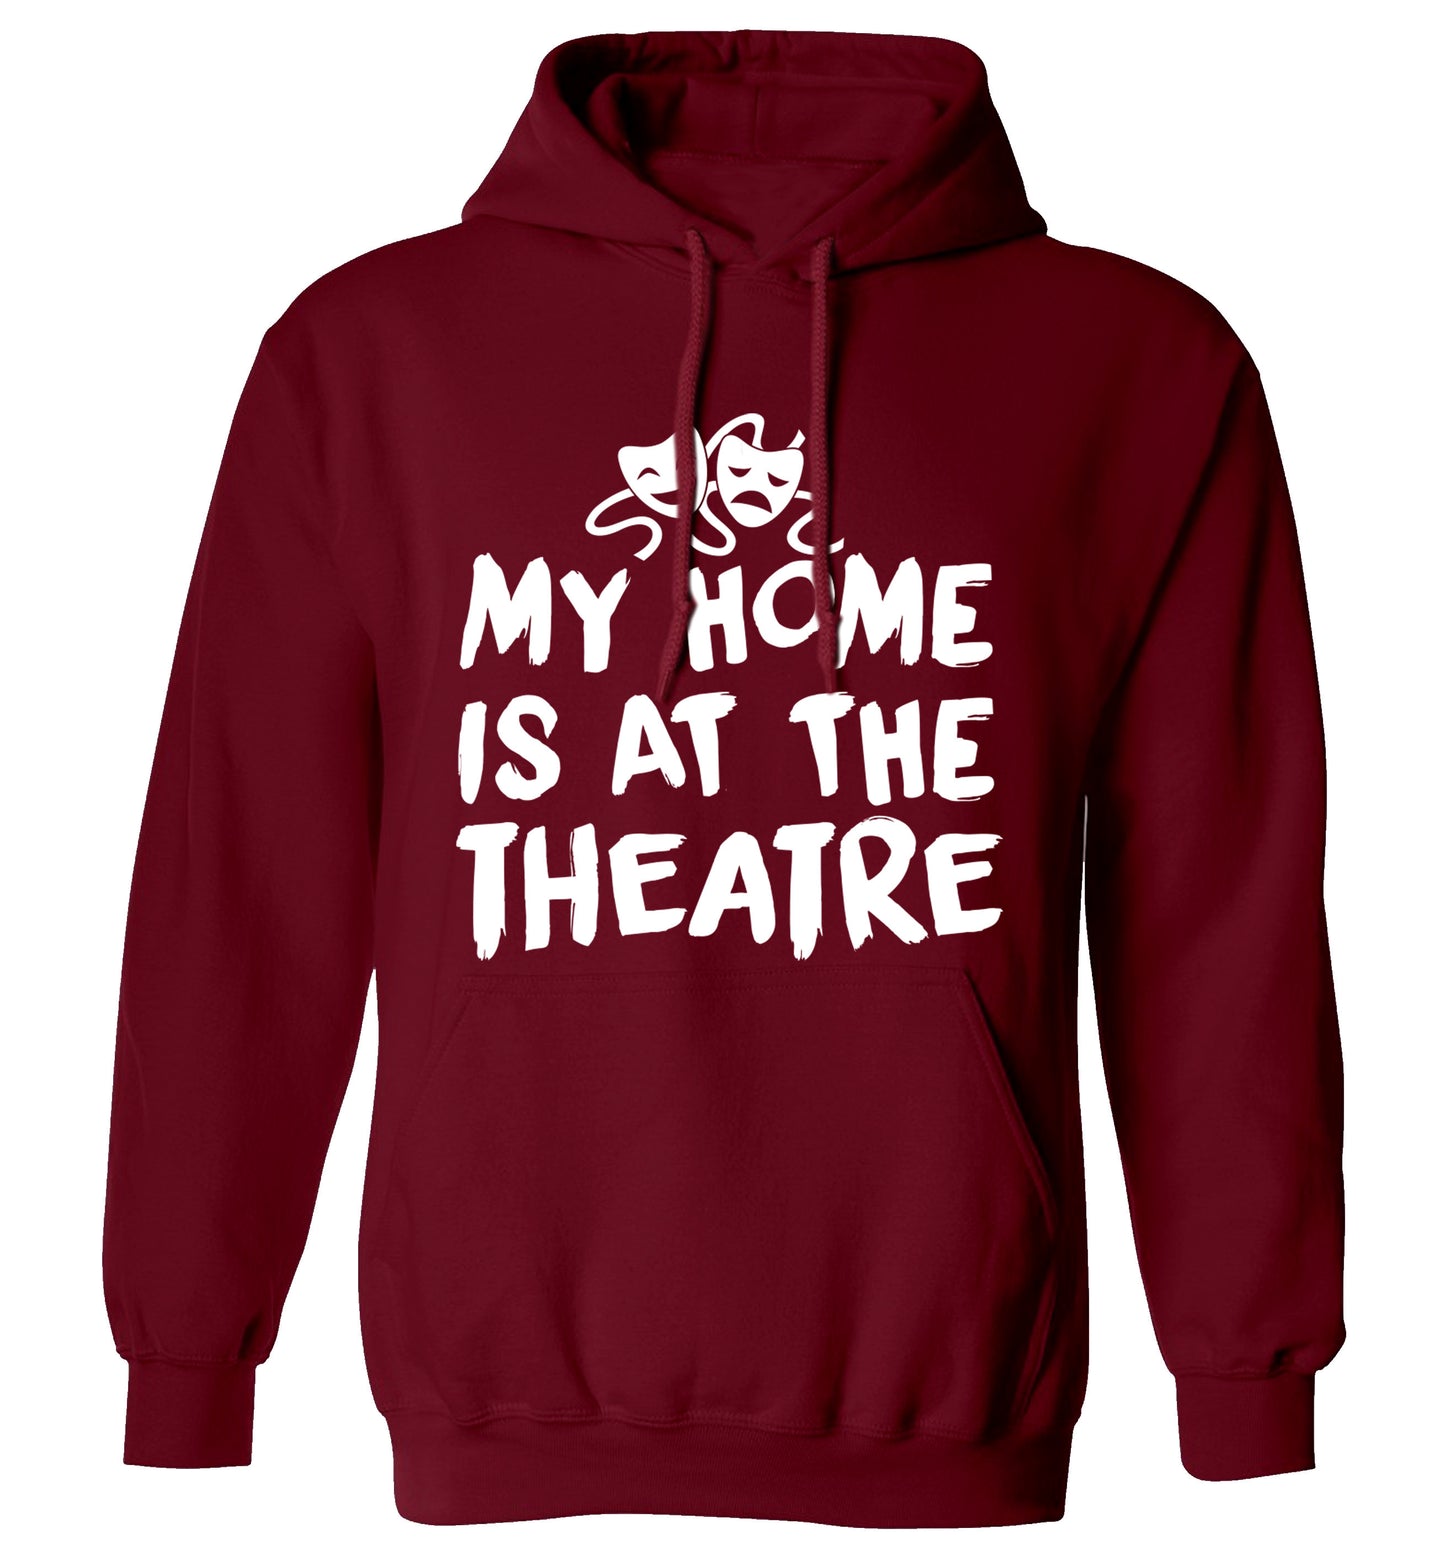 My home is at the theatre adults unisex maroon hoodie 2XL